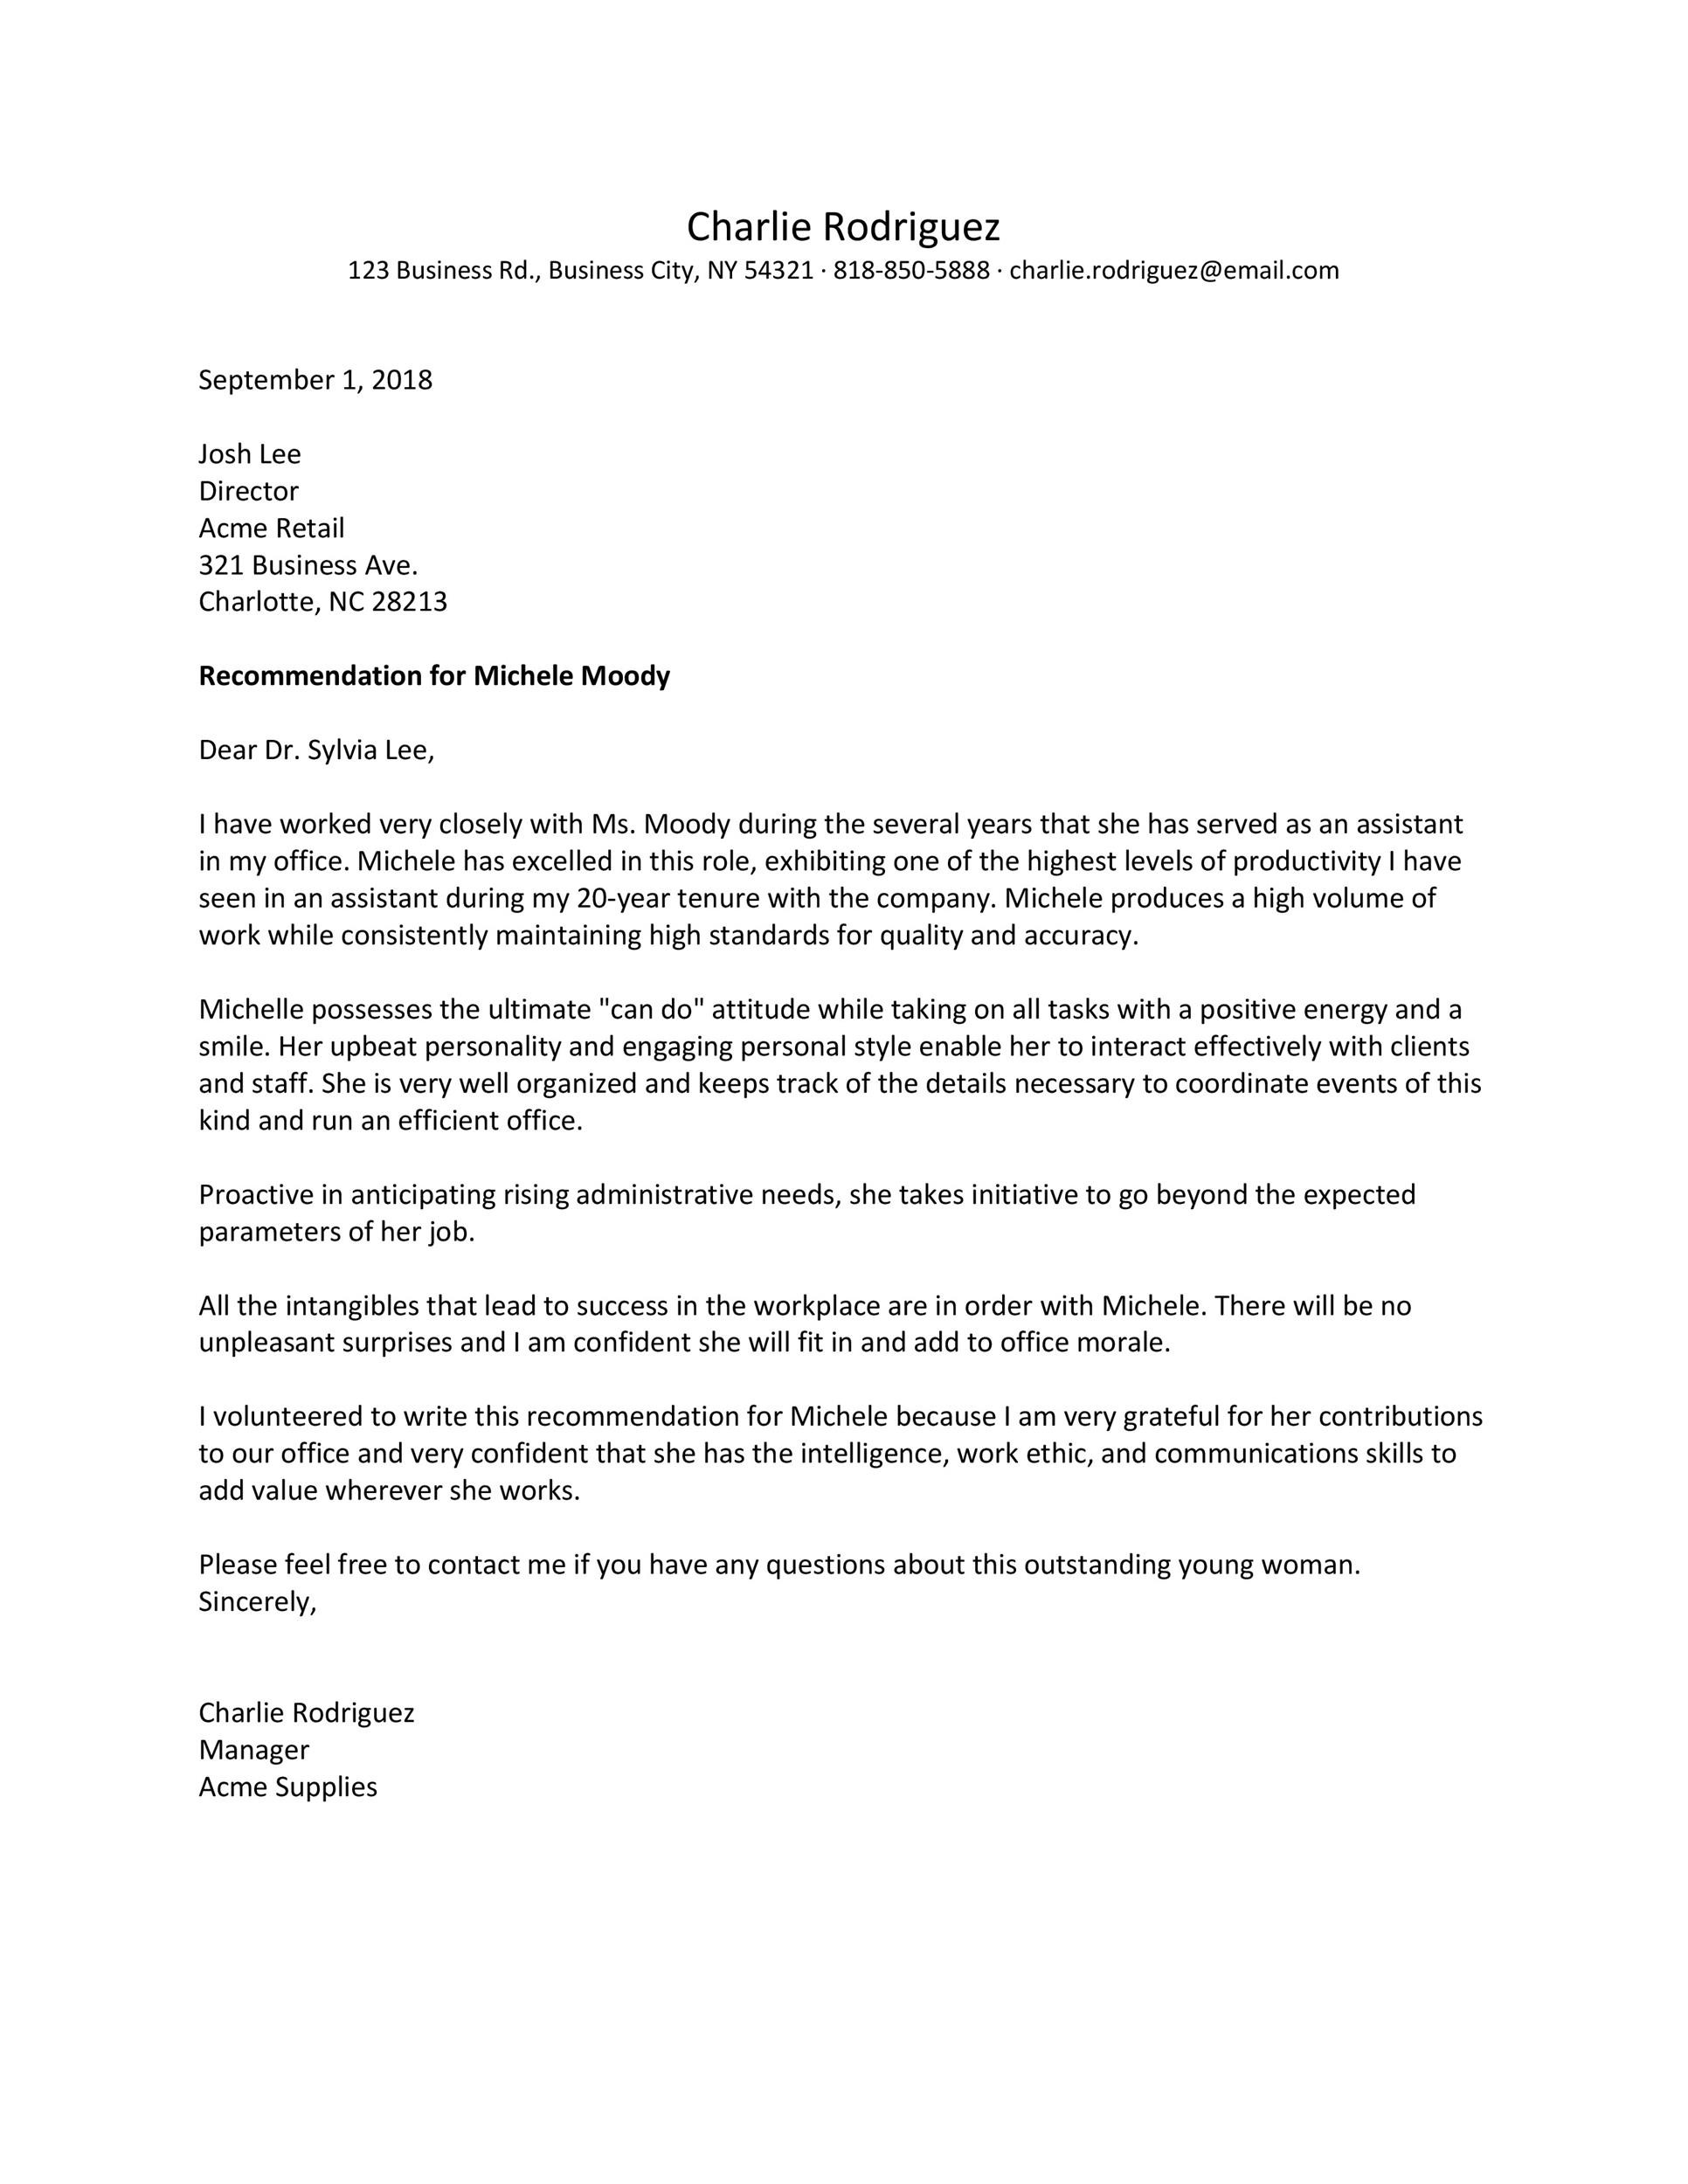 Employee Reference Letter Template from templatelab.com